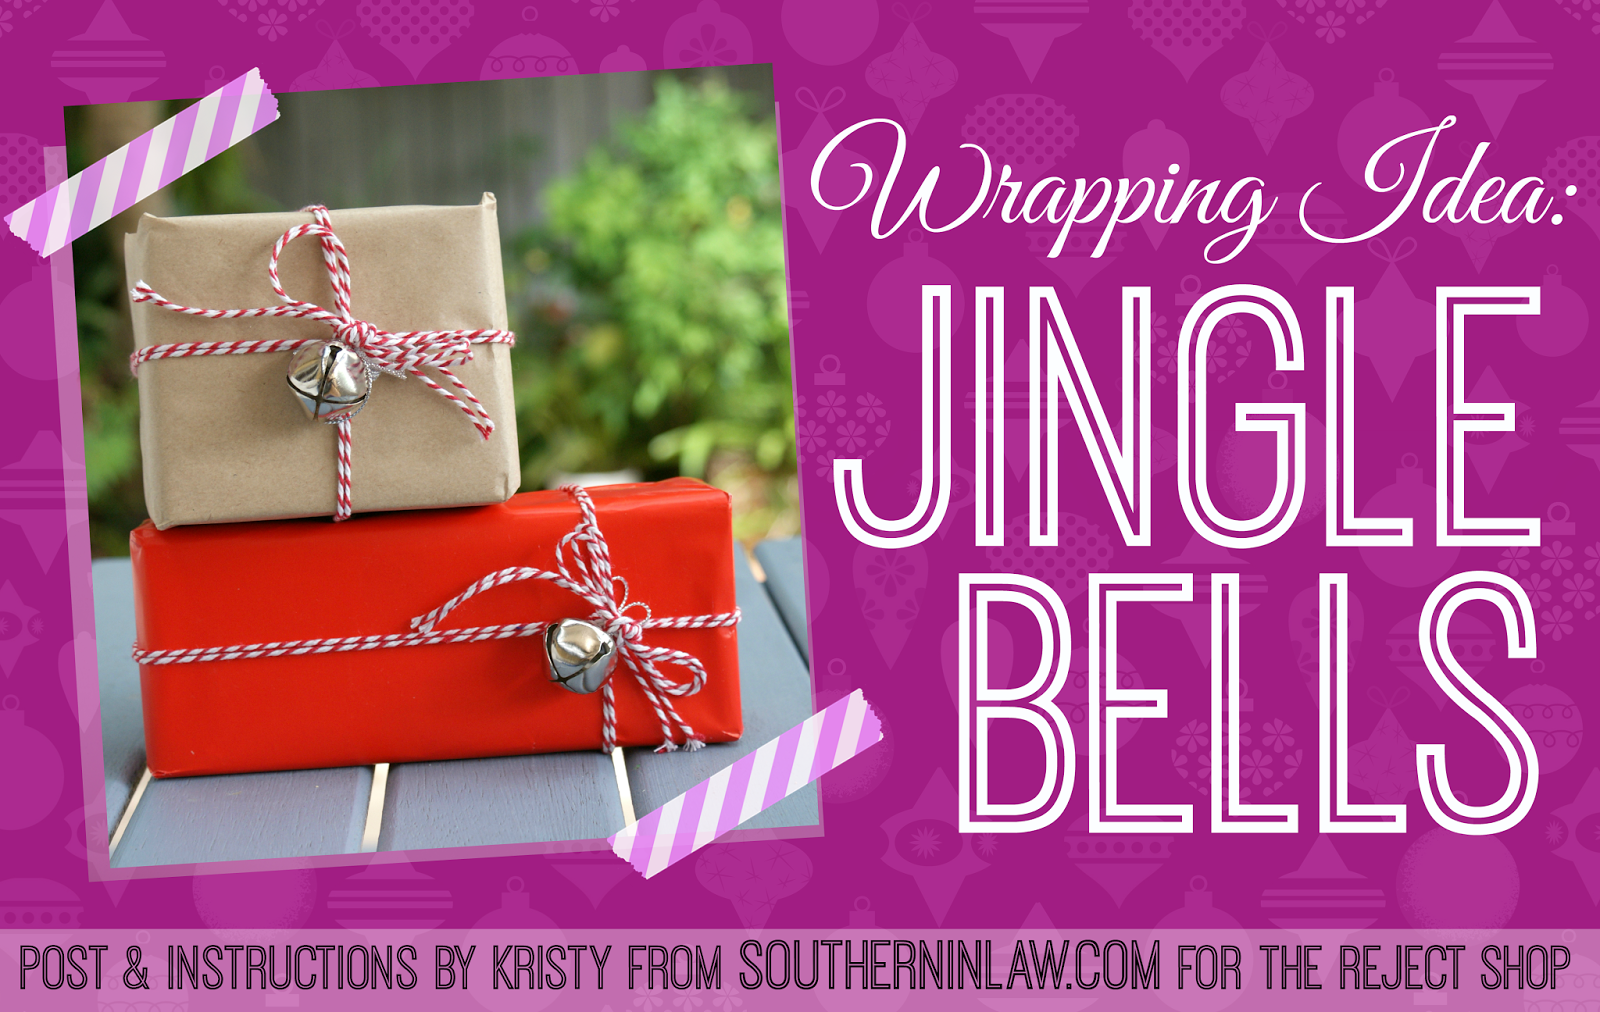 Beautiful Gift Wrapping Ideas on a Budget - Adding Silver Bells for a Festive Touch